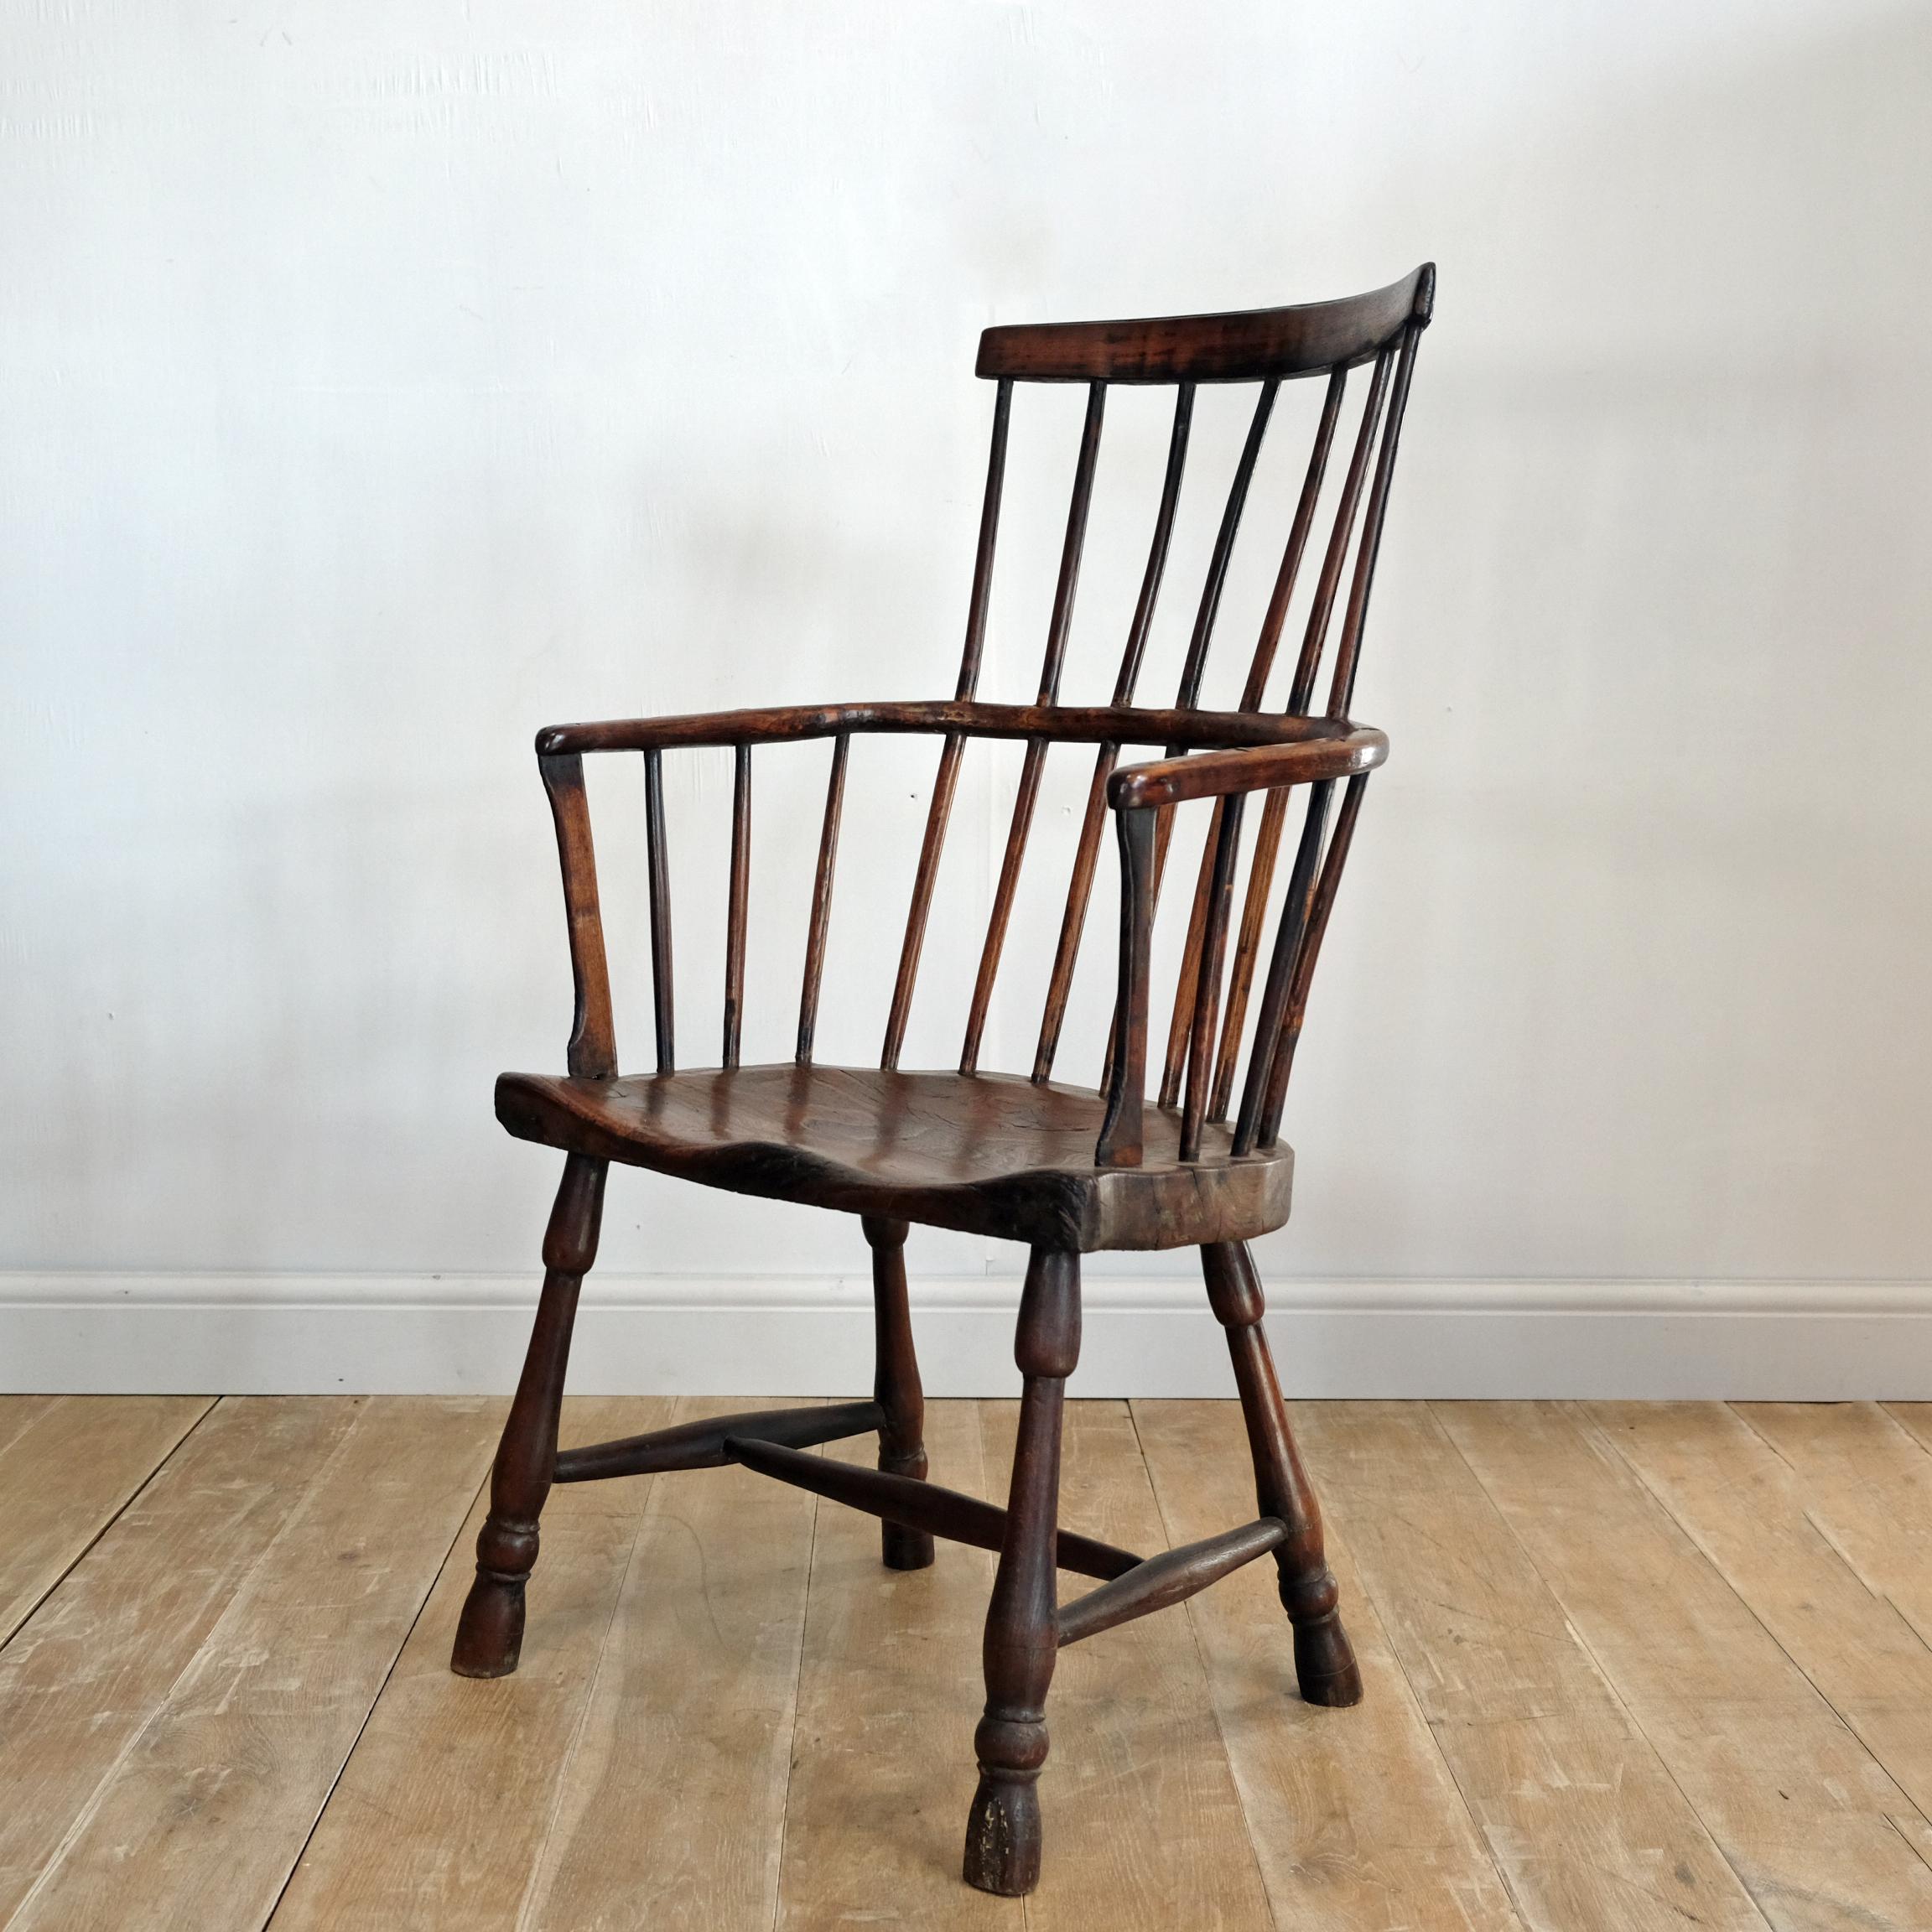 An exceptional large 18th century West Country comb back Windsor chair with thick shaped elm slab seat supported by four egg and reel turned legs, united by a tapered H stretcher. Flattened arm supports and simple hand drawn spindles with single